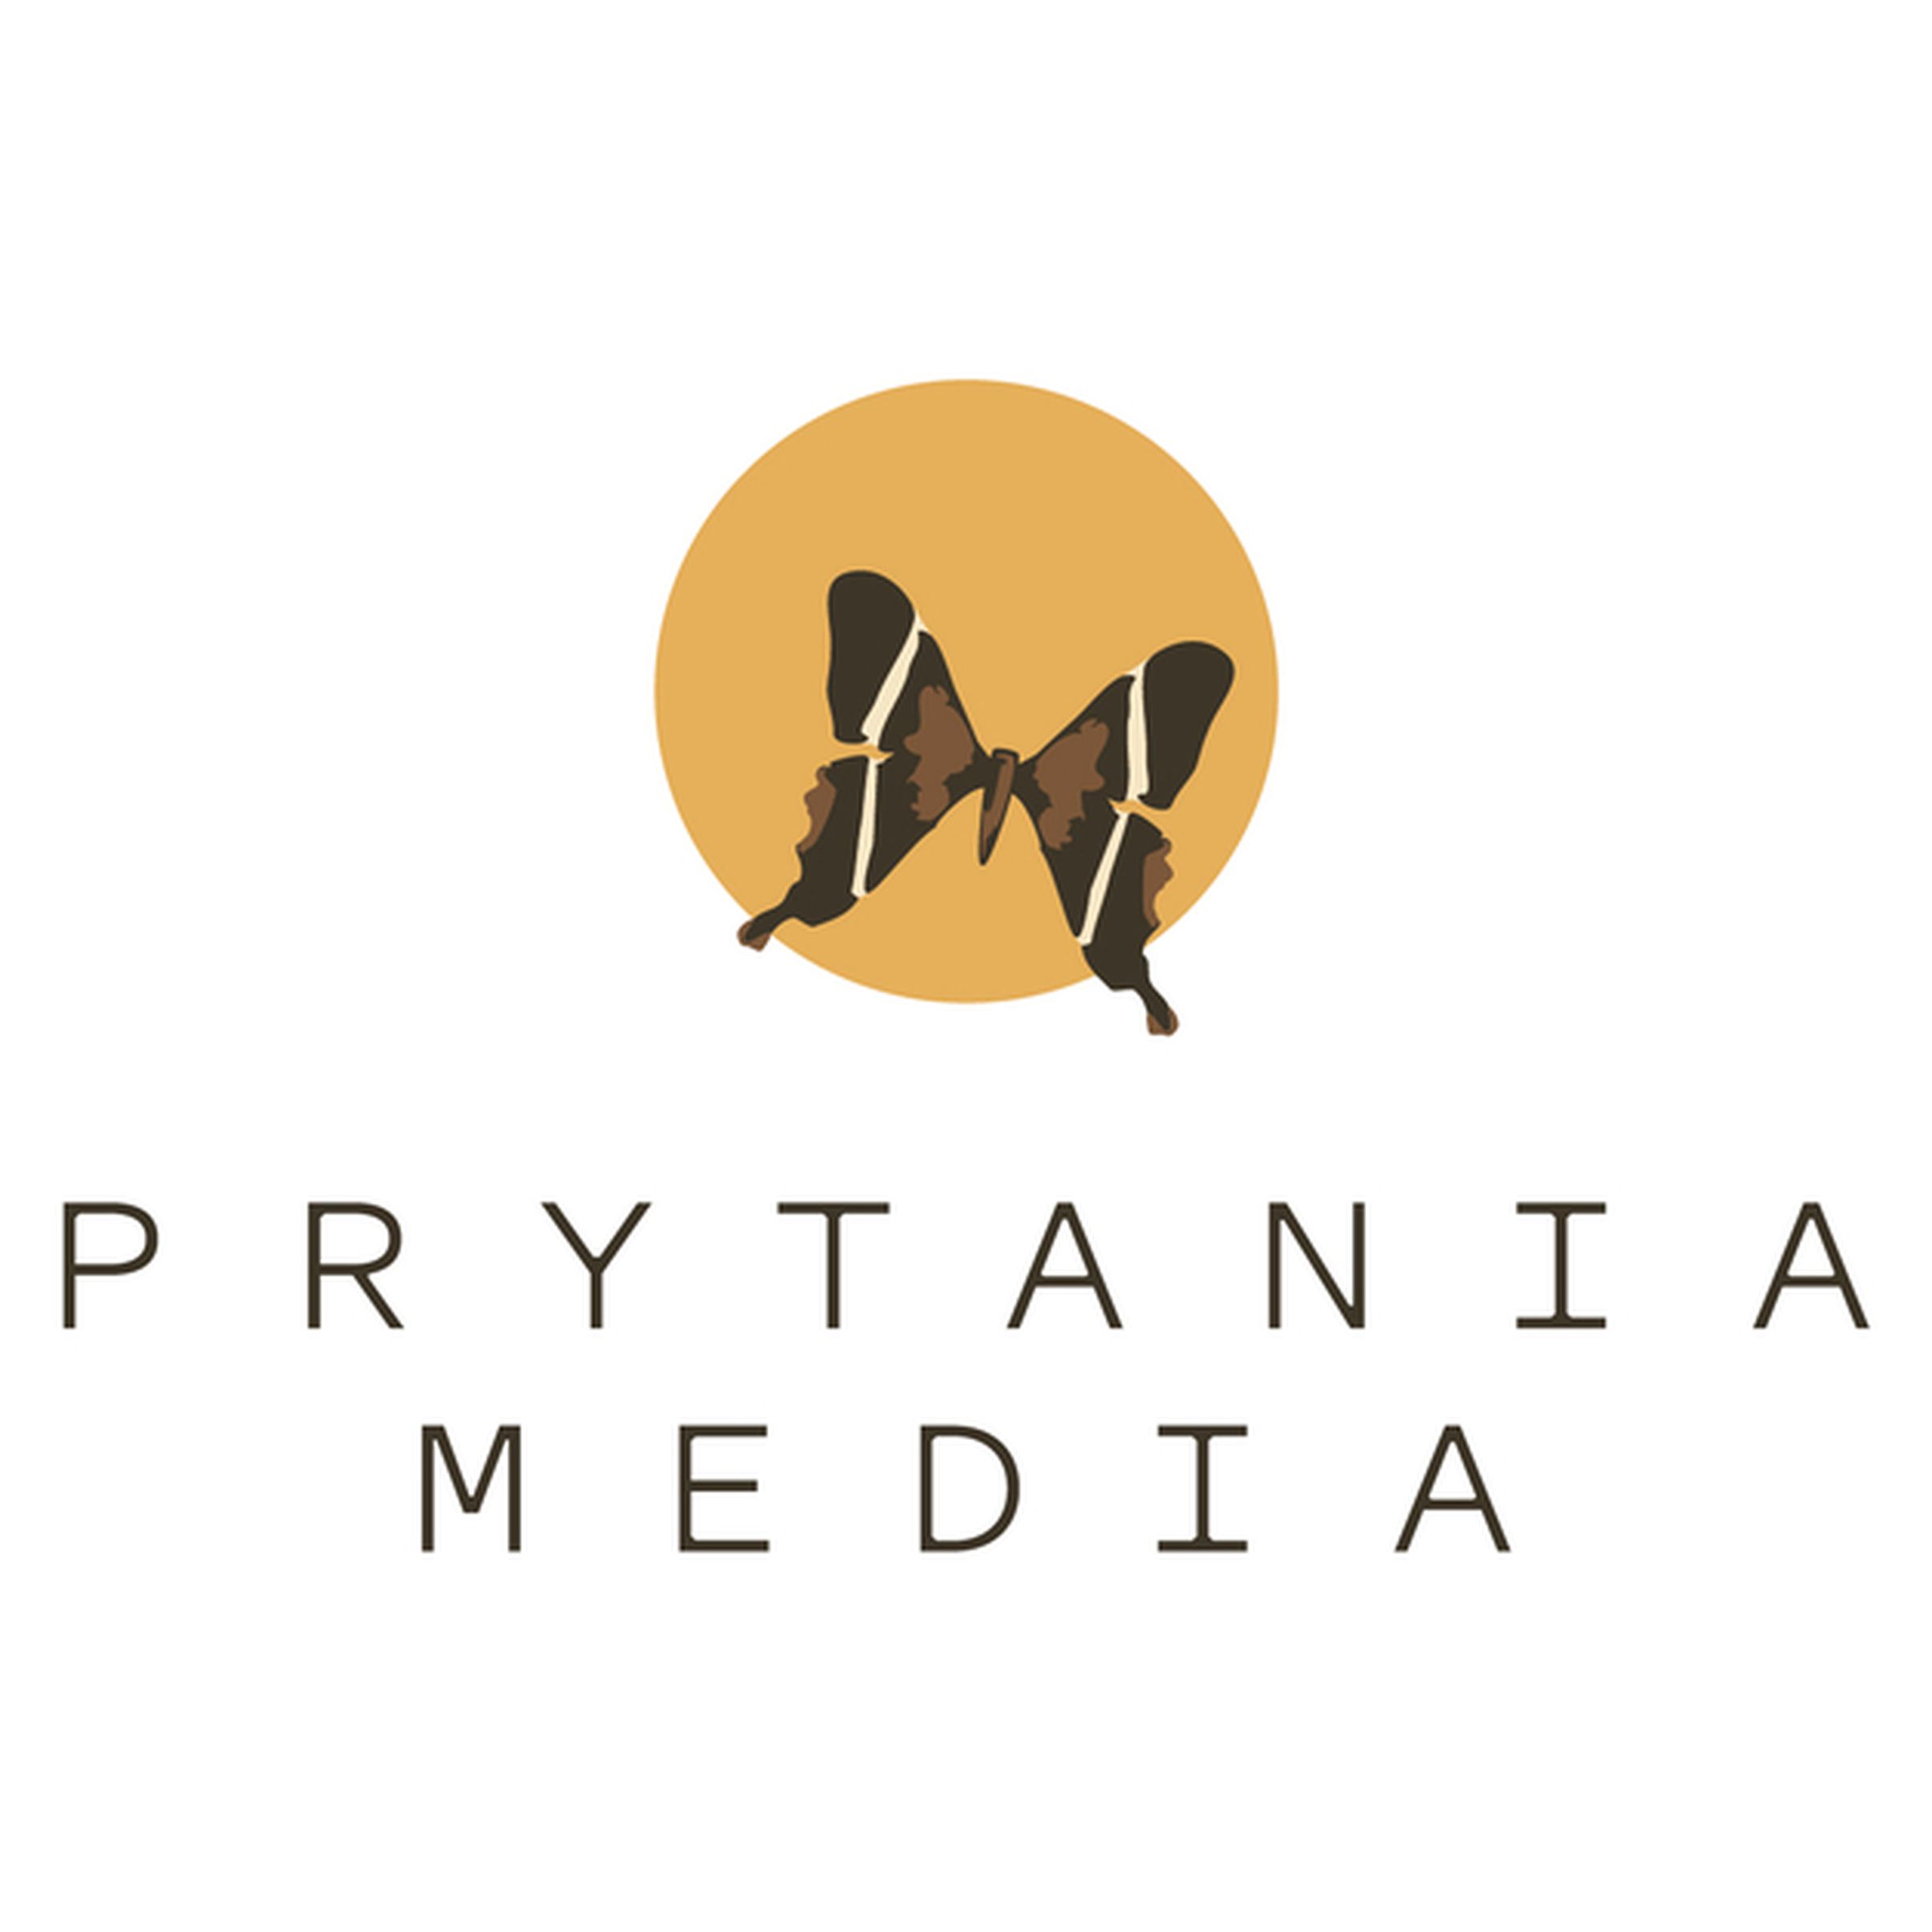 Logo of Prytania Media featuring a butterfly on a yellow circle over the text “Prytania Media”